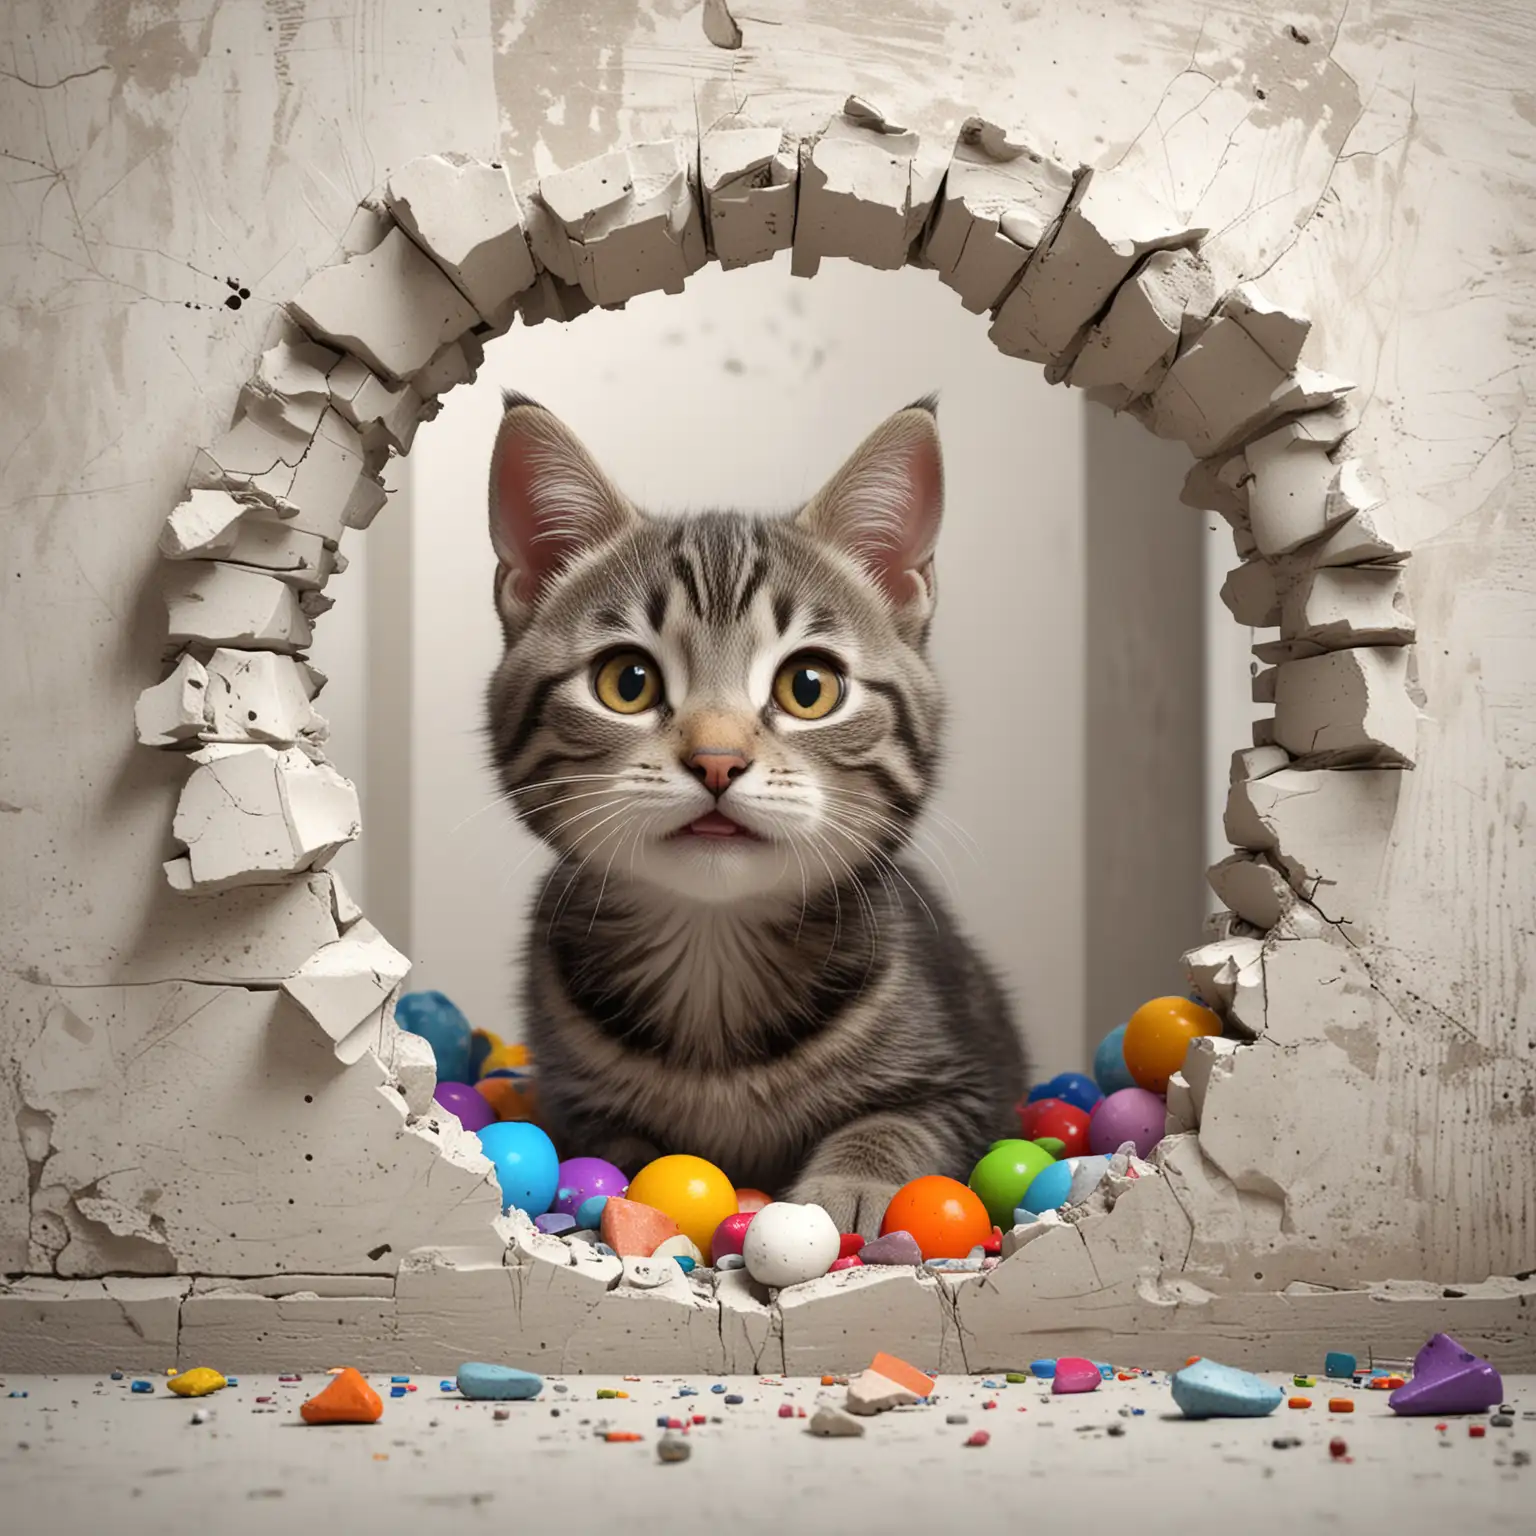 A whimsical 3D render of a playful happy smiling gray tabby kitty peeking out of a hole in a cracked white ceramic wall. The kitten is surrounded by an assortment of colorful cat toys, adding a cheerful atmosphere. The cracked wall adds a sense of character and story, while the overall composition creates a delightful and conceptual art piece., conceptual art, 3d render